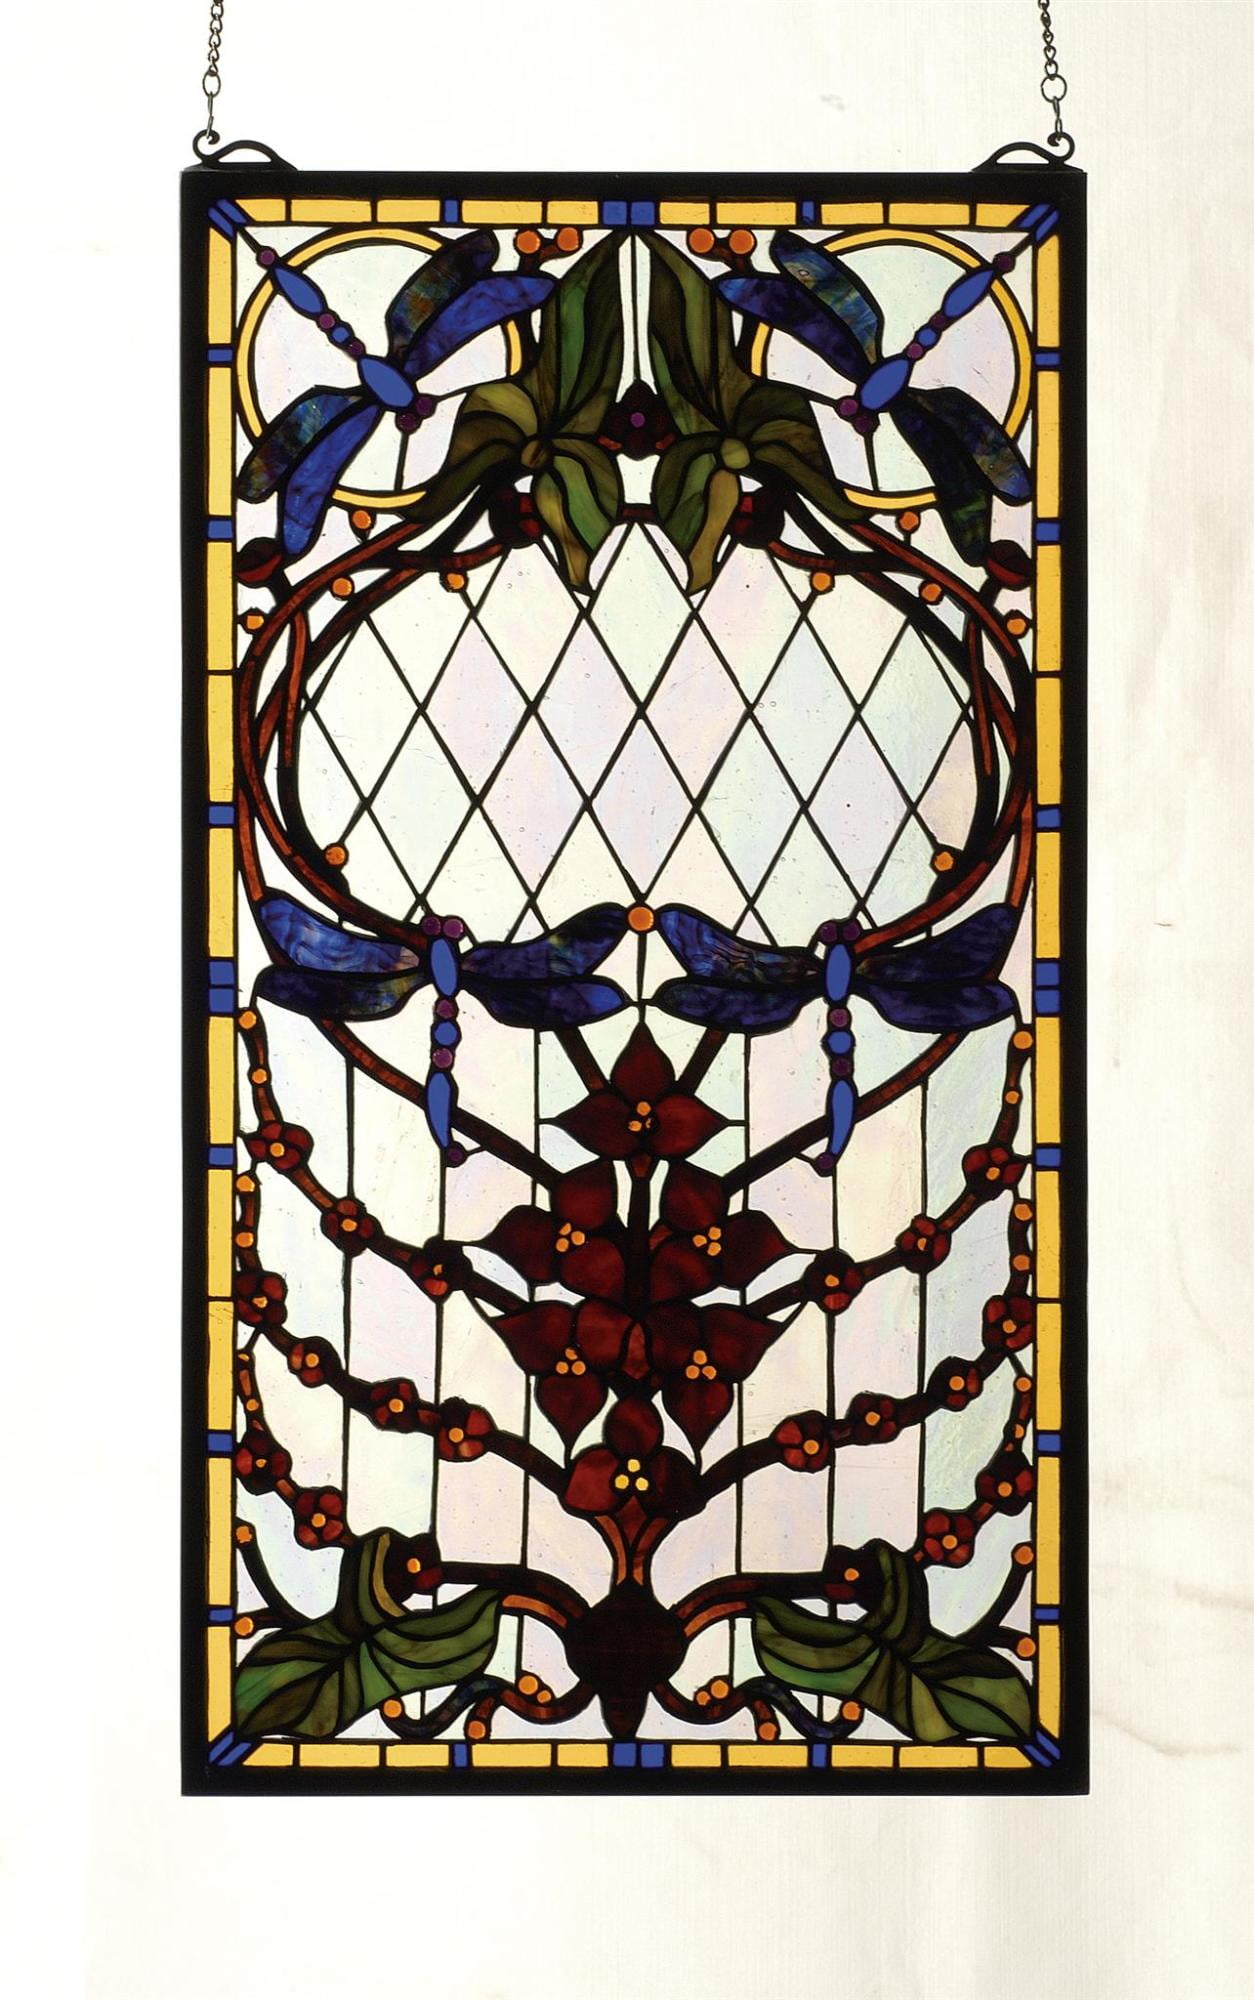 14"W X 25"H Dragonfly Allure Stained Glass Window